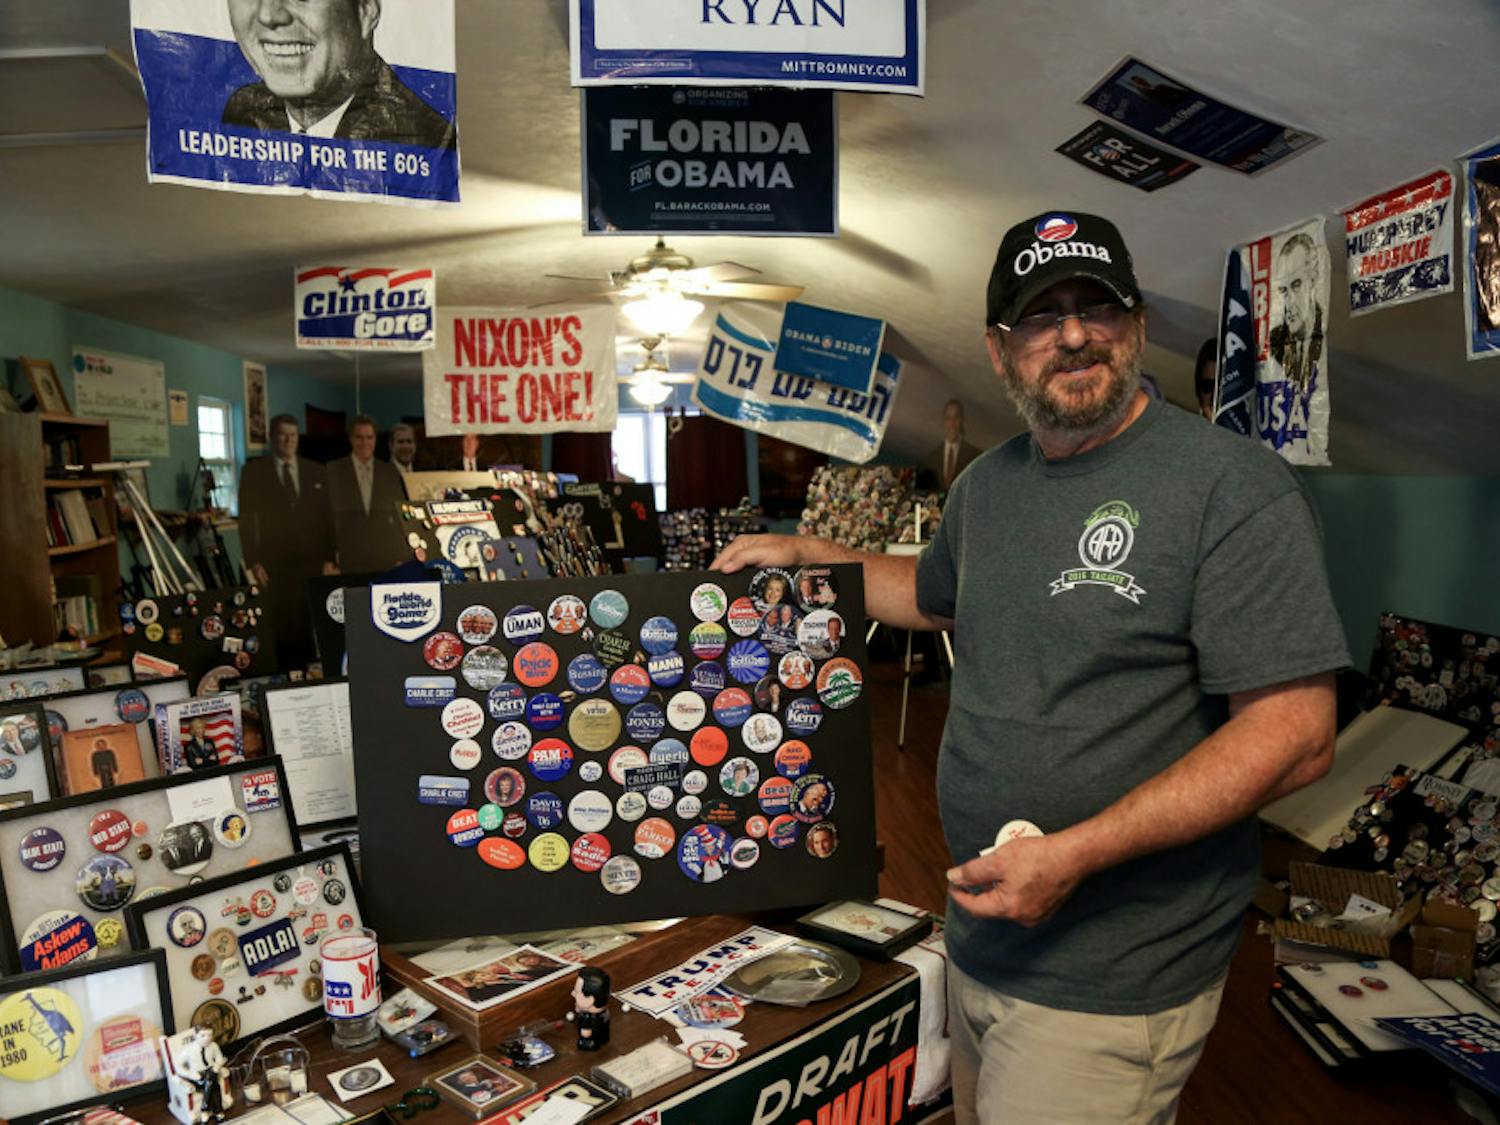 By Melissa Gomez
When Bill Clinton visited Gainesville on Saturday, Ed Kellerman got the former president to sign his favorite shirt.
When the 64-year-old UF master lecturer met Bill Clinton, he handed him a frame full of political buttons, one of which he created.
“I feel privileged he has one of my buttons now,” Kellerman said.
The second floor of the Gainesville resident’s house is decorated in memorabilia, mostly from presidential elections, ranging from buttons and bobbleheads to banners and trinkets. The trinkets, some of which are about a decade old, span the political spectrum, but he considers himself a Democrat.
Kellerman said he remembers when Bill Clinton visited UF in 1992, a scene he captured with a camera and put onto one of the buttons he gave to Bill Clinton on Saturday.
Cardboard cutouts of former presidents sit in his house, along with two lifesize cutouts of Hillary Clinton. He has a blue cone that reads “Holler for Change” and a beer can that reads “Billary Beer.”
On Wednesday, the day after the election, he said he plans on bringing both of the cutouts of Hillary Clinton to one of his classes to show support for her presidency.
Kellerman said Hillary Clinton’s background as secretary of state proves she has the diplomacy skills to succeed as the next president.
“If she’s not ready, then who is?” he said.